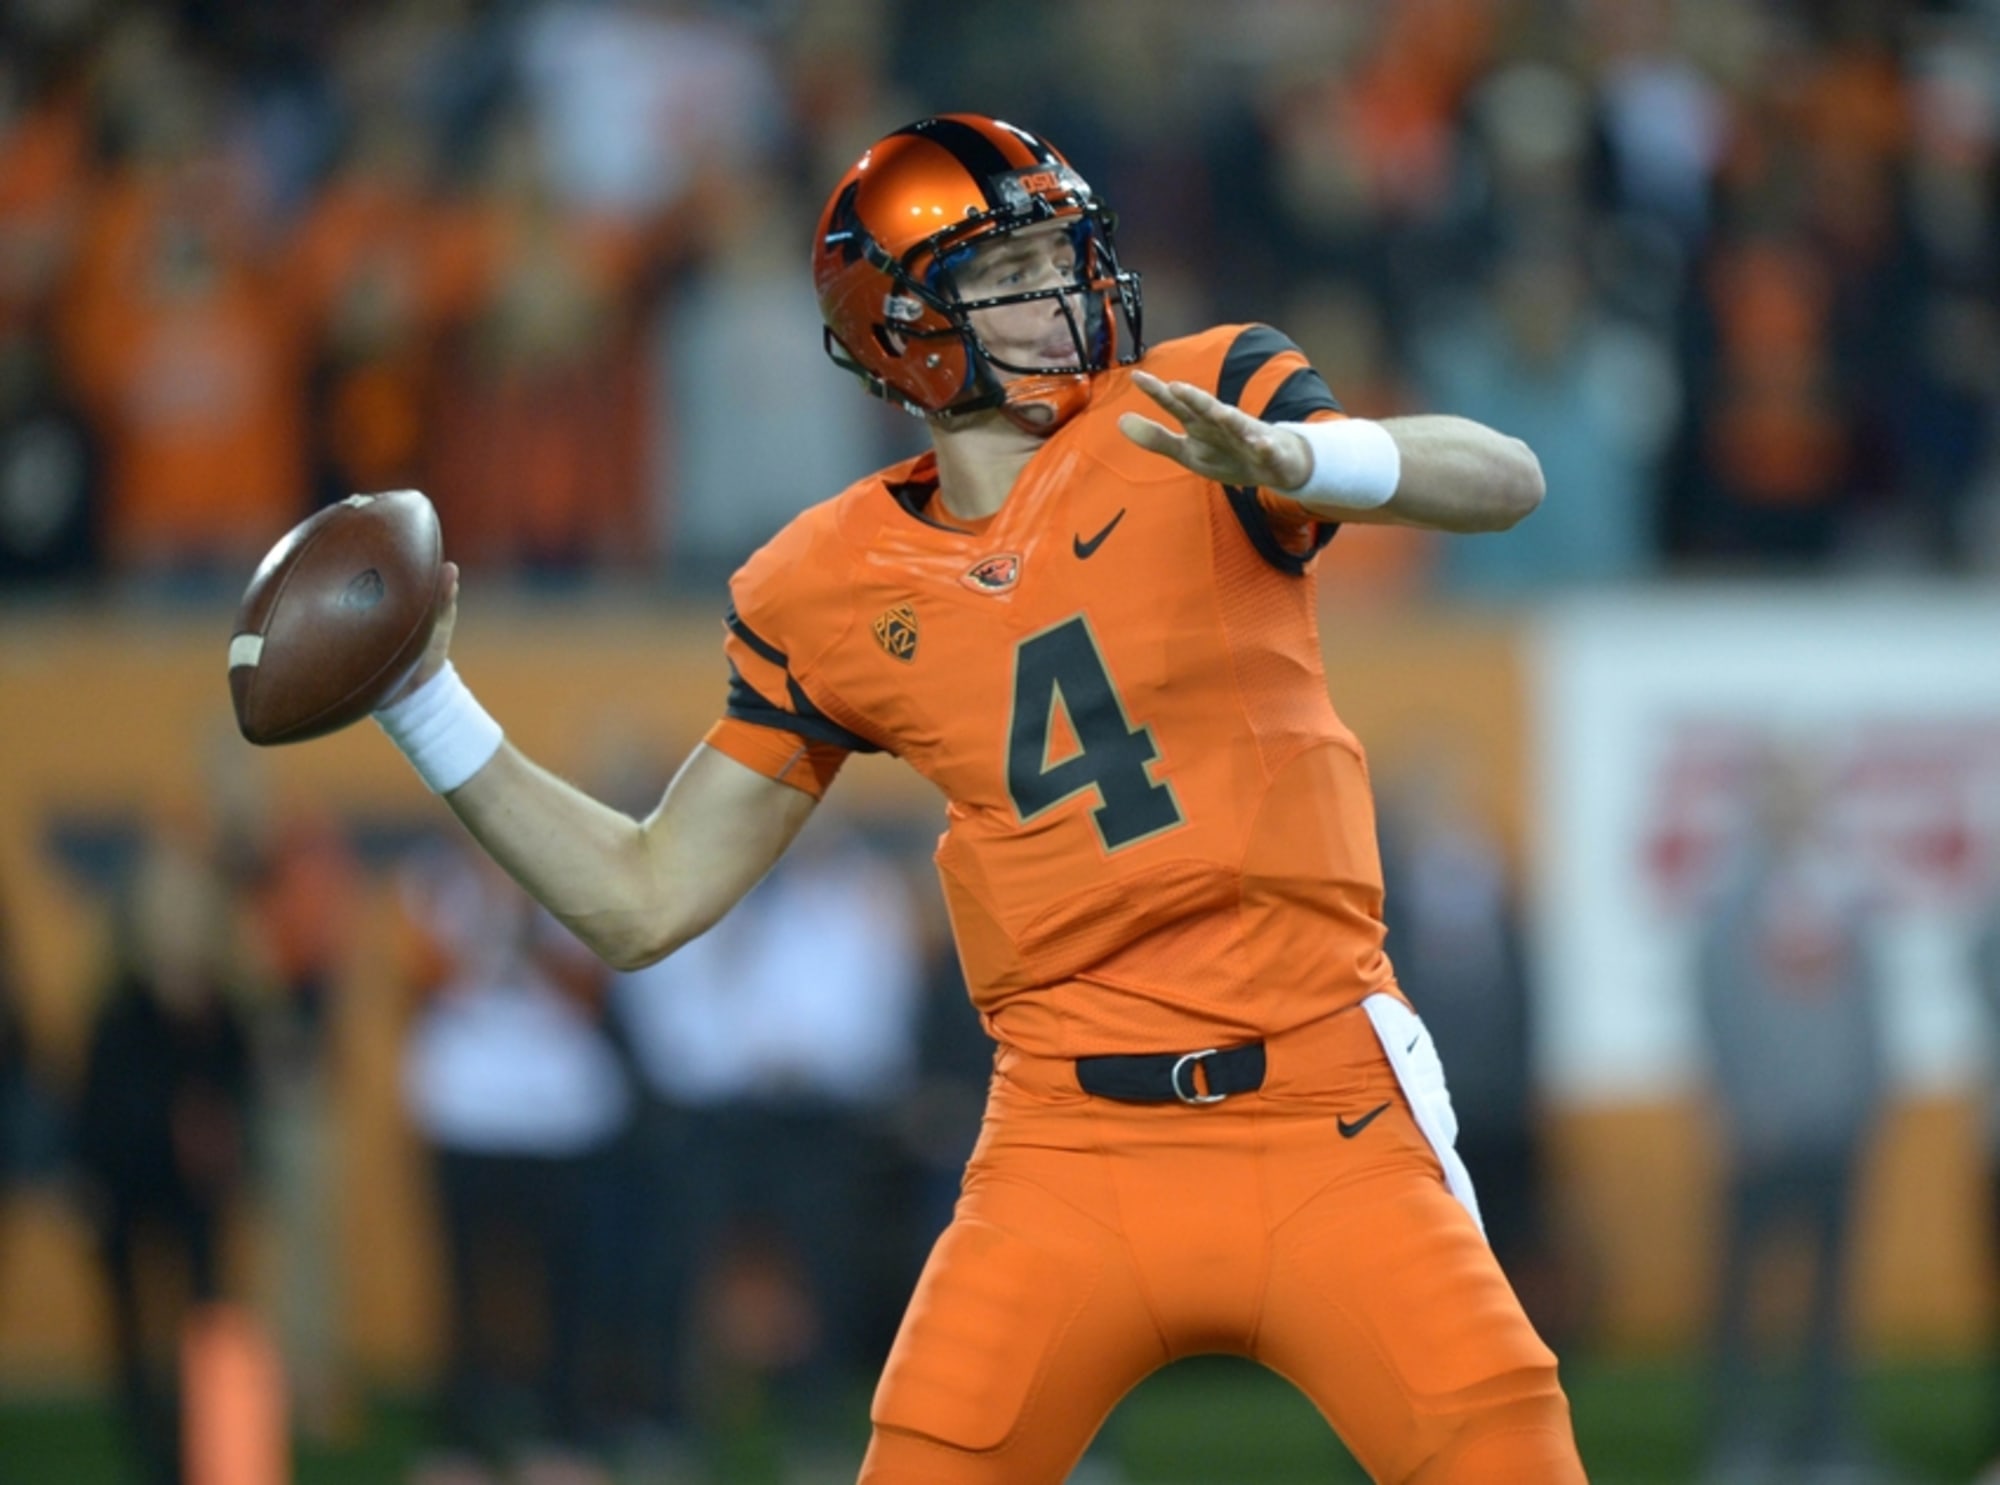 Oregon State's Sean Mannion the most NFLready senior QB in college